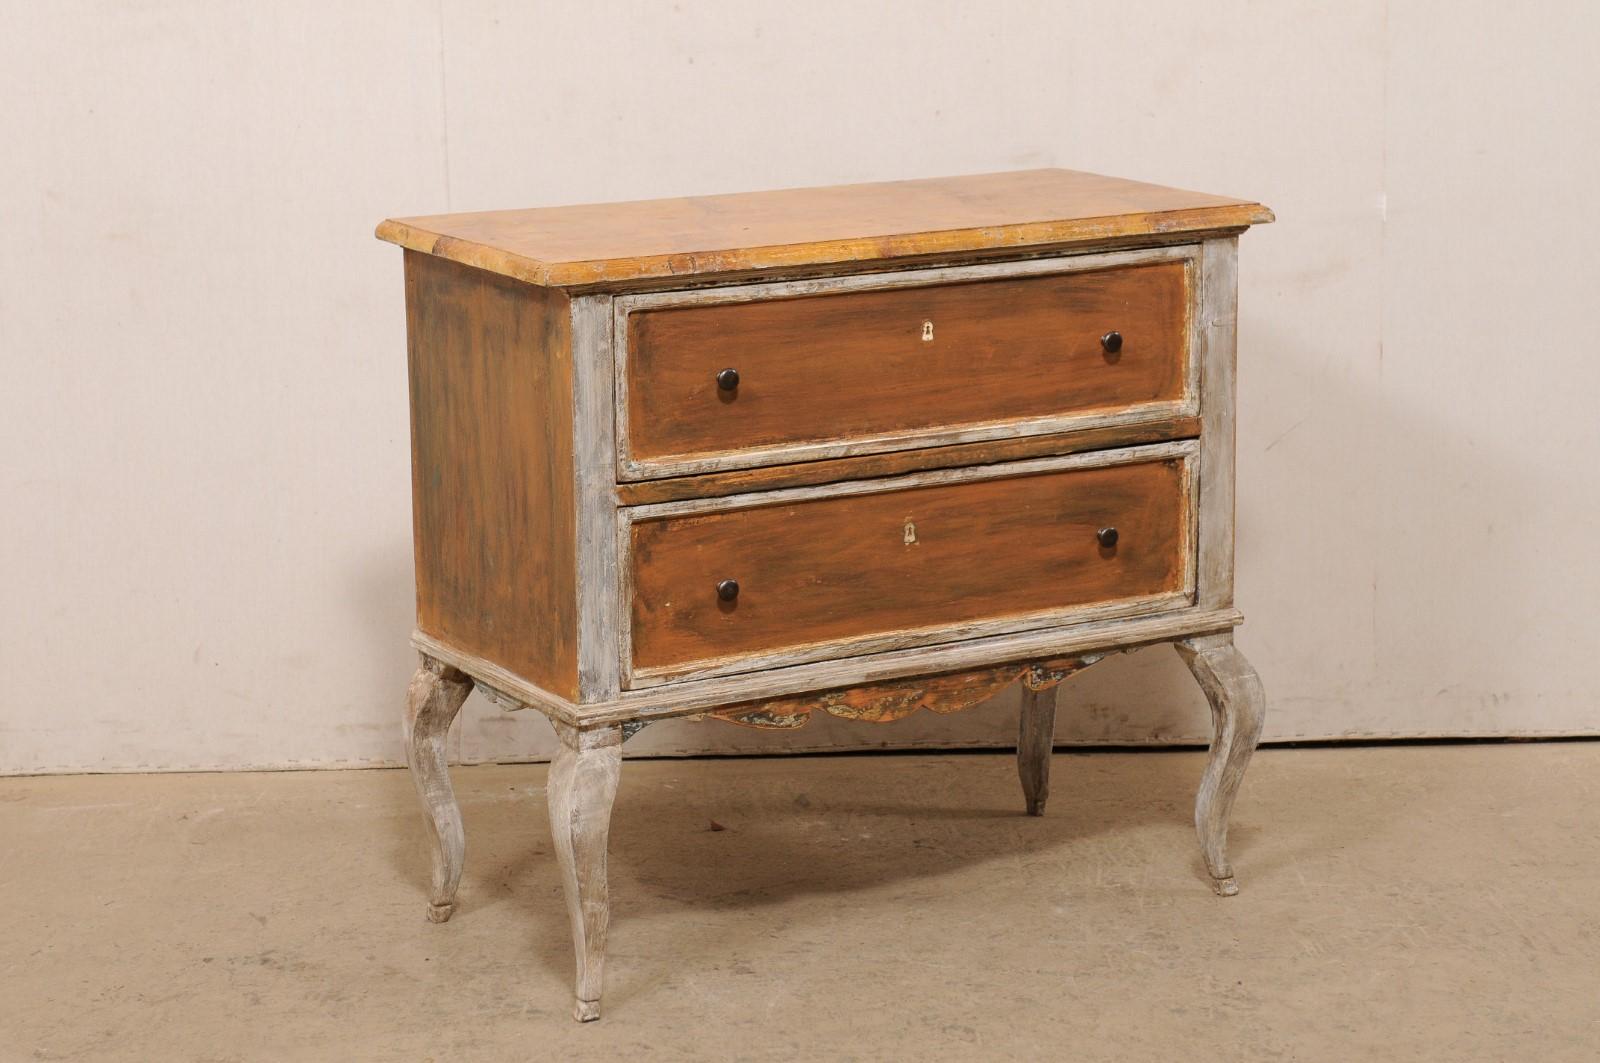 A French painted wood, raised two-drawer chest from the 19th century. This antique chest from France features a slightly overhanging faux-marble painted top, with case beneath consisting of two stacked, dovetailed drawers, a nice carved skirt along